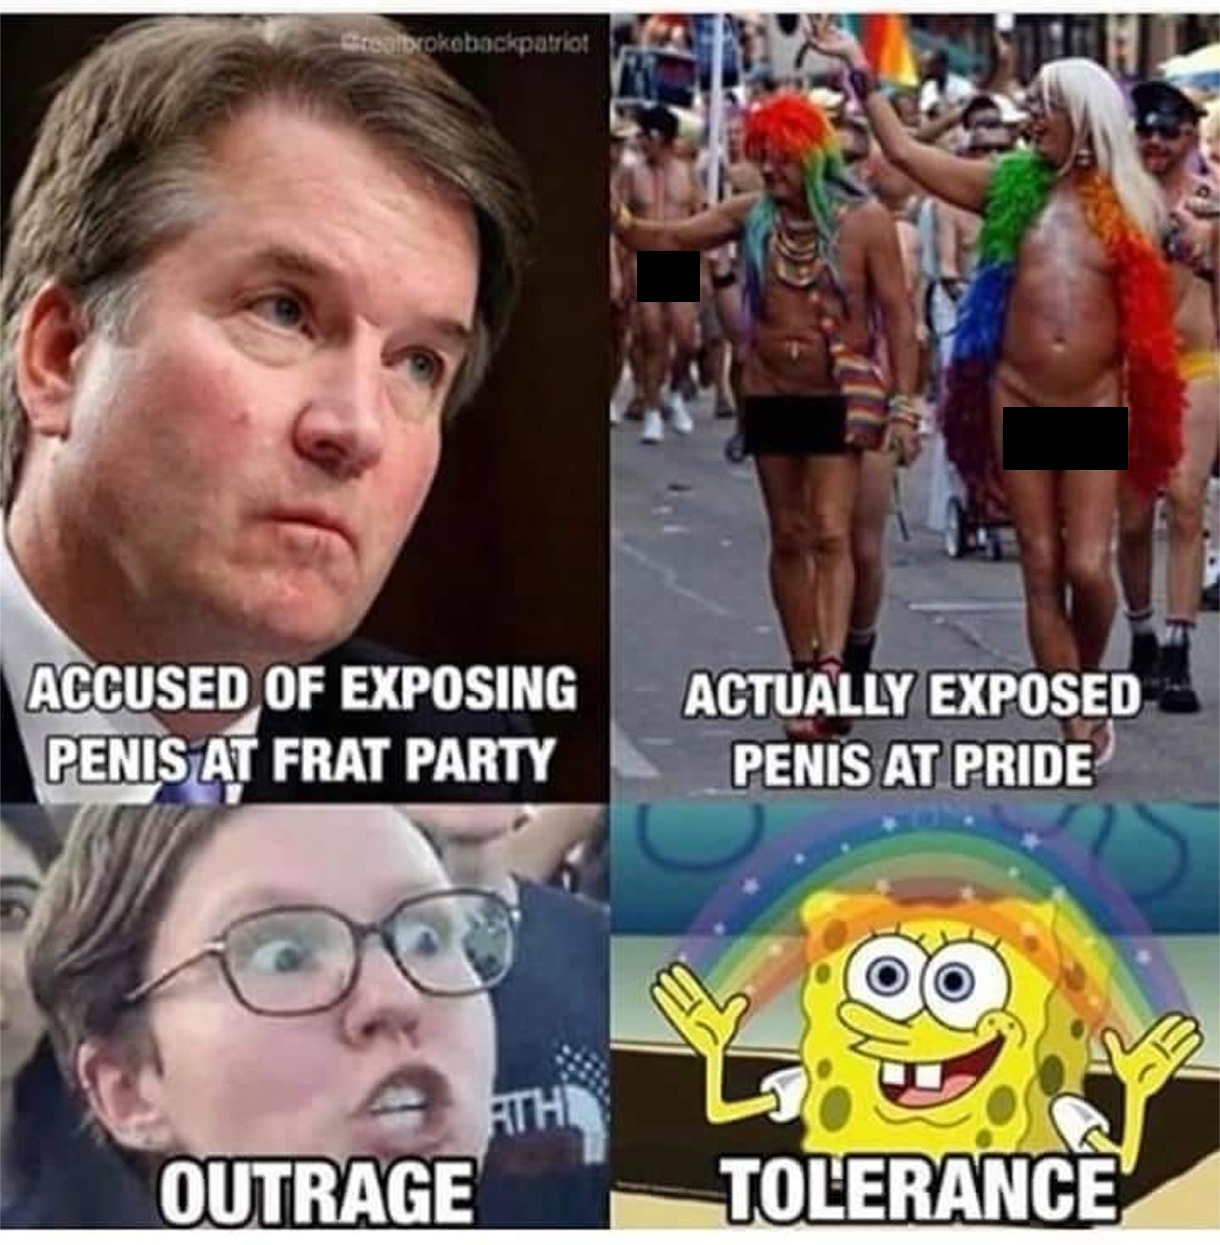 lgbtqqip2saa meme - Stealbrokebackpatriot Accused Of Exposing Penis At Frat Party Actually Exposed Penis At Pride Outrage Tolerance